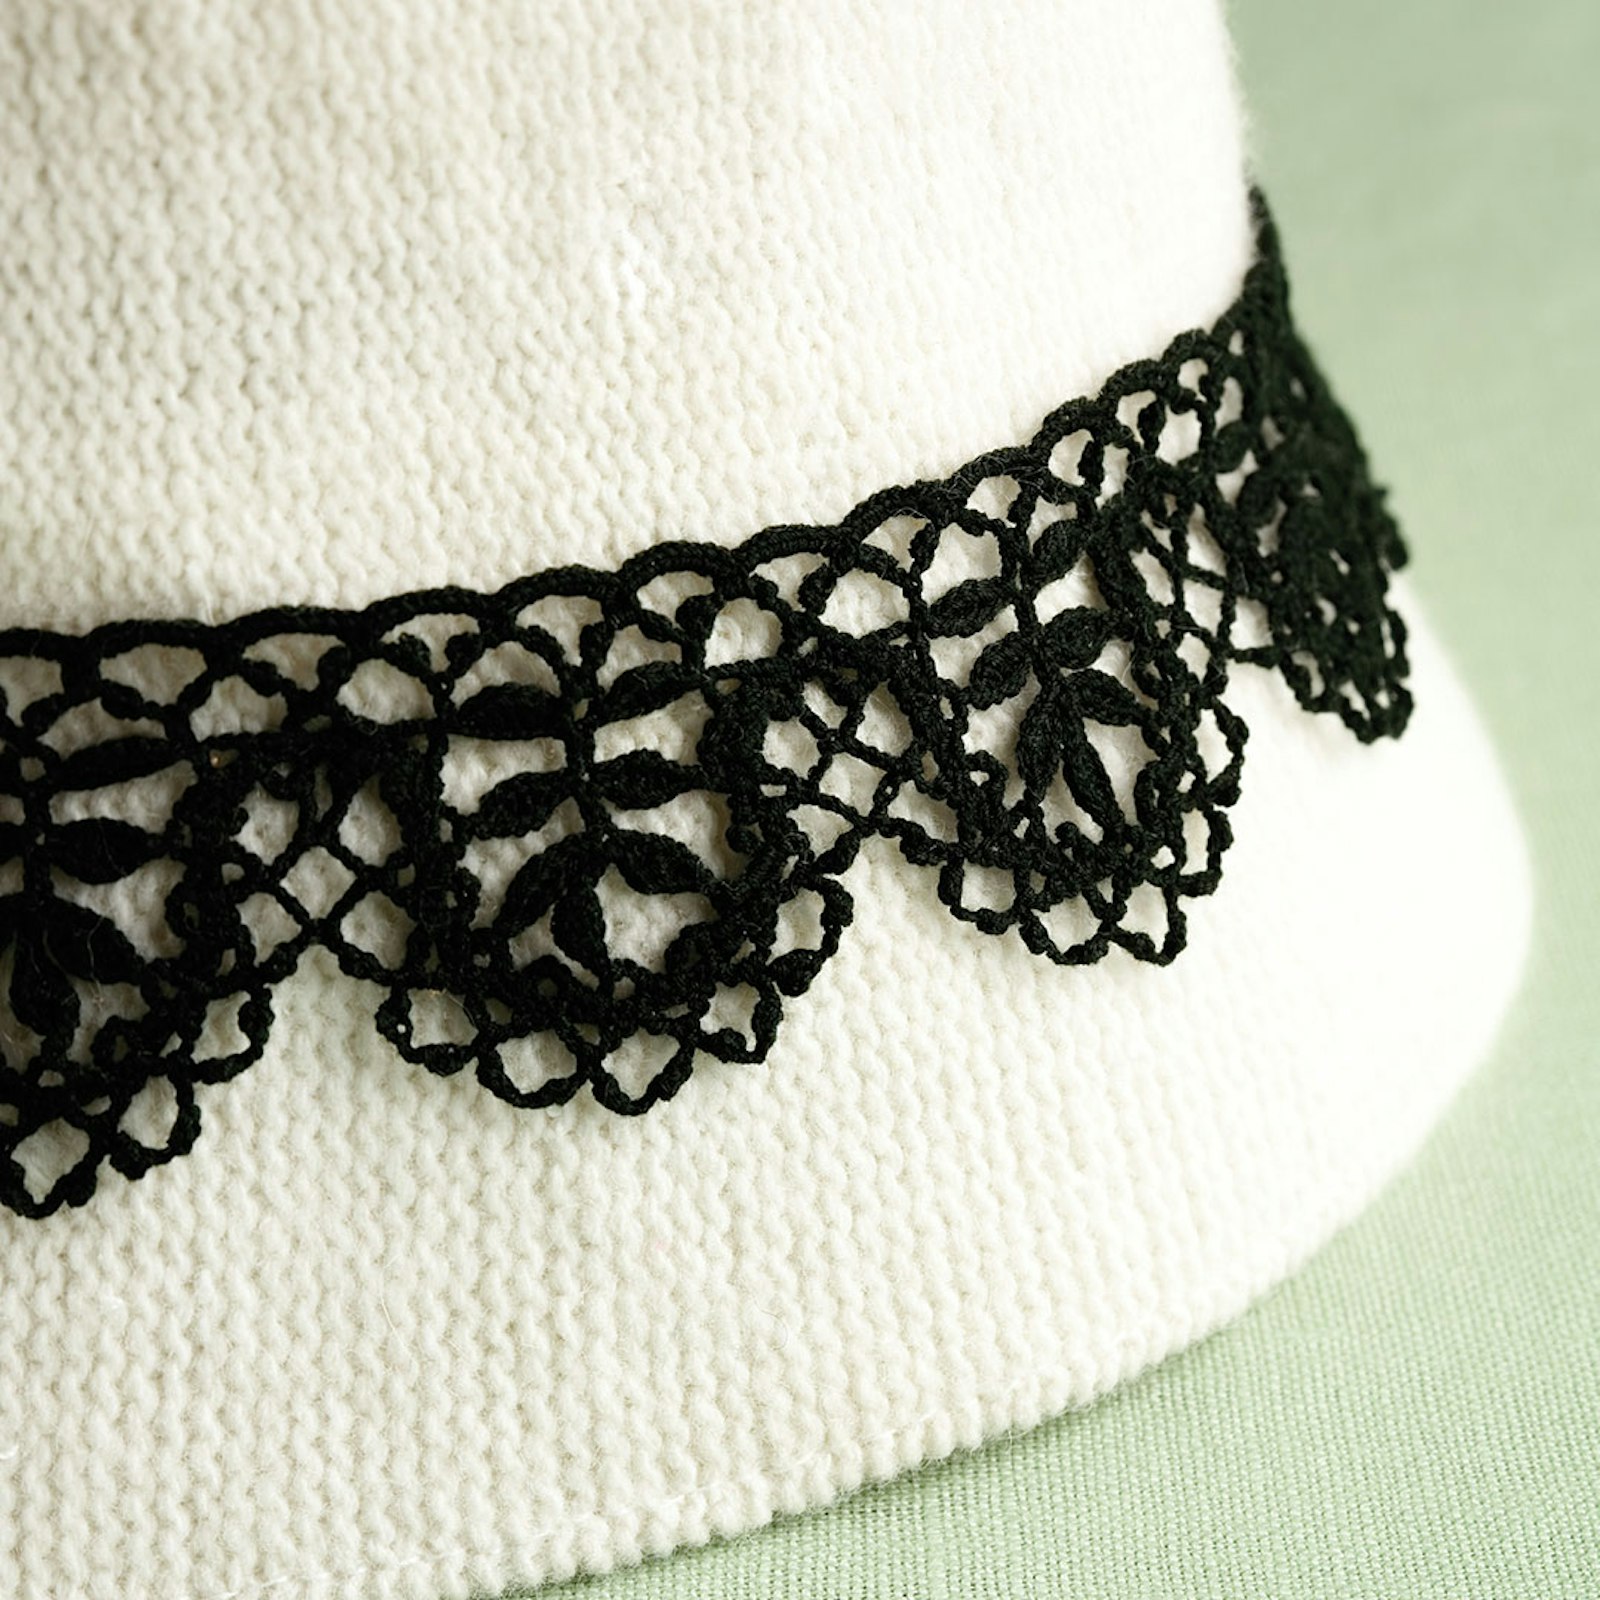 Maltese Edging: A Crocheted-Lace Edging